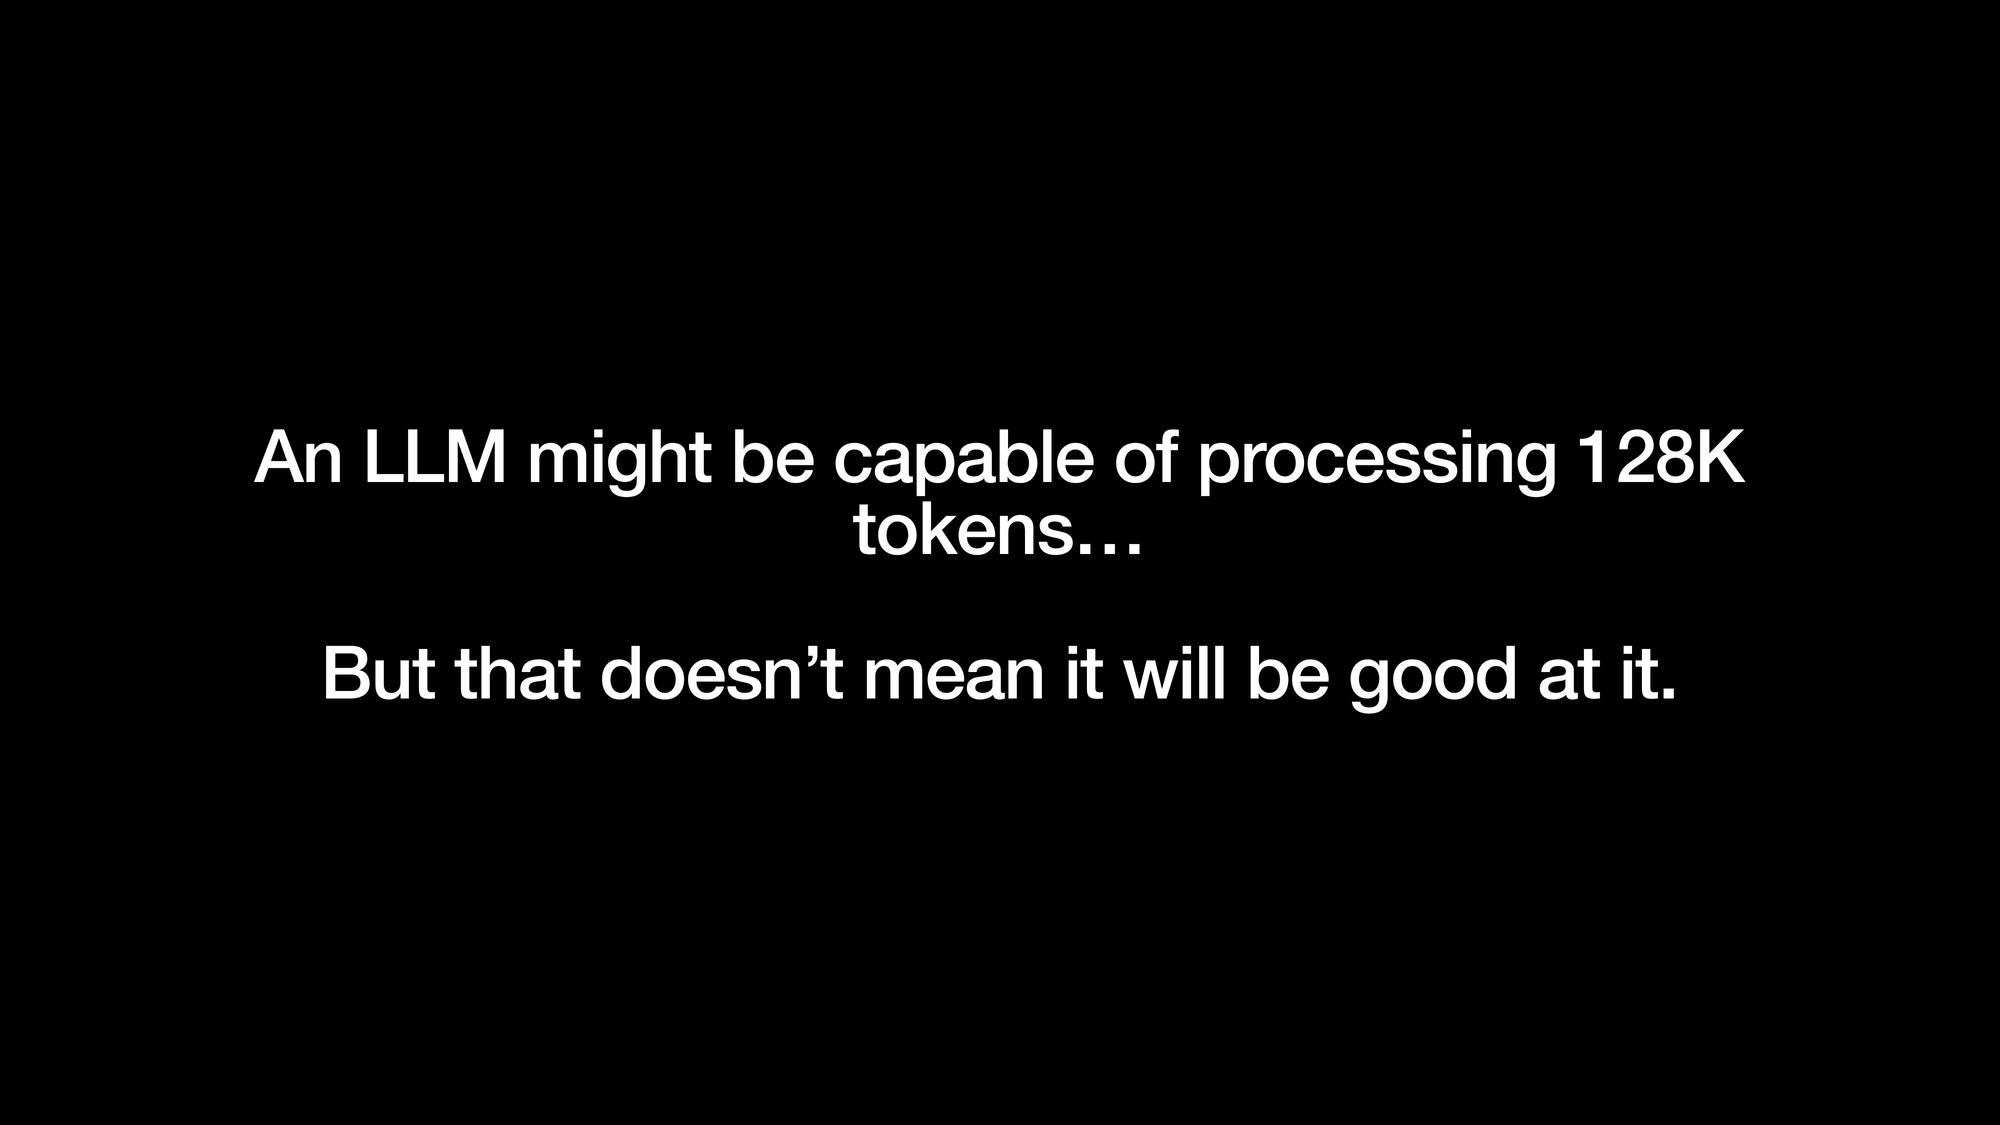 An LLM might be capable of processing 128K
tokens&hellip; But that doesn’t mean it will be good at it.